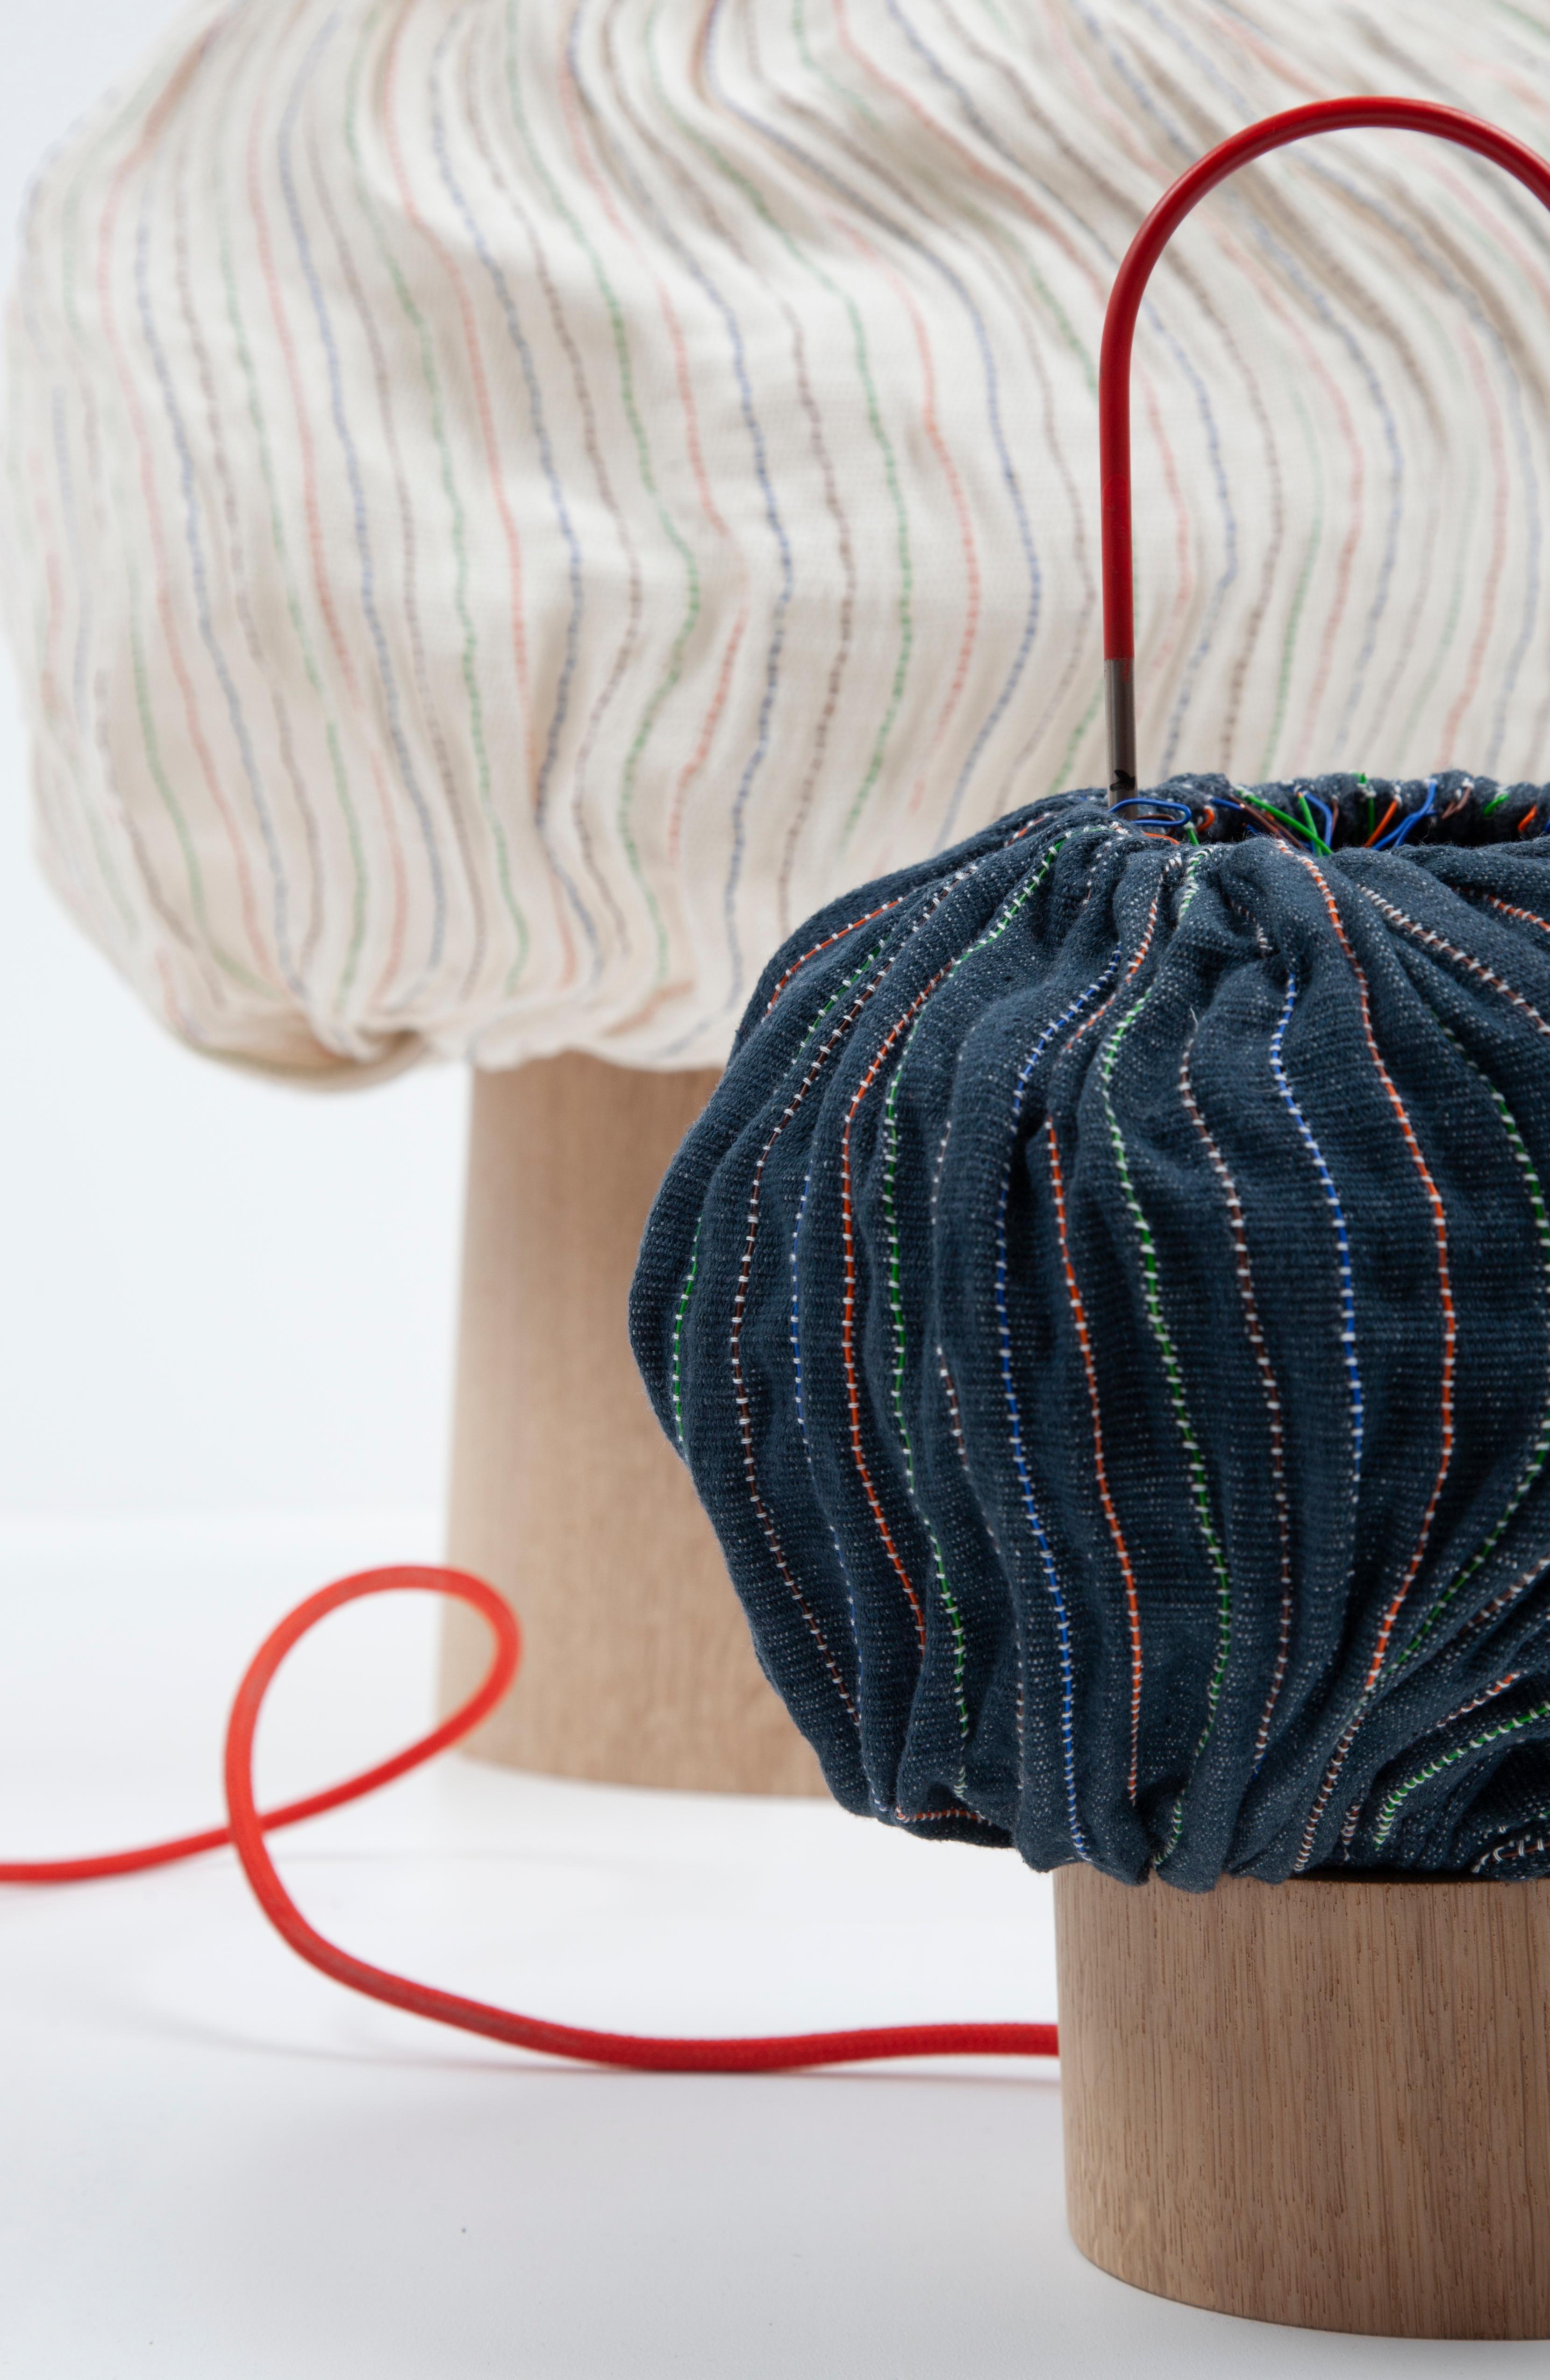 The Nebule lamp with a metal base large is part of a lamps series made from handwoven cotton with recycled phone wire by the Ethiopian cooperative ShimenaWeavingFriendships in Arba Minch.

The weaving of recycled wires and cotton results in a soft,